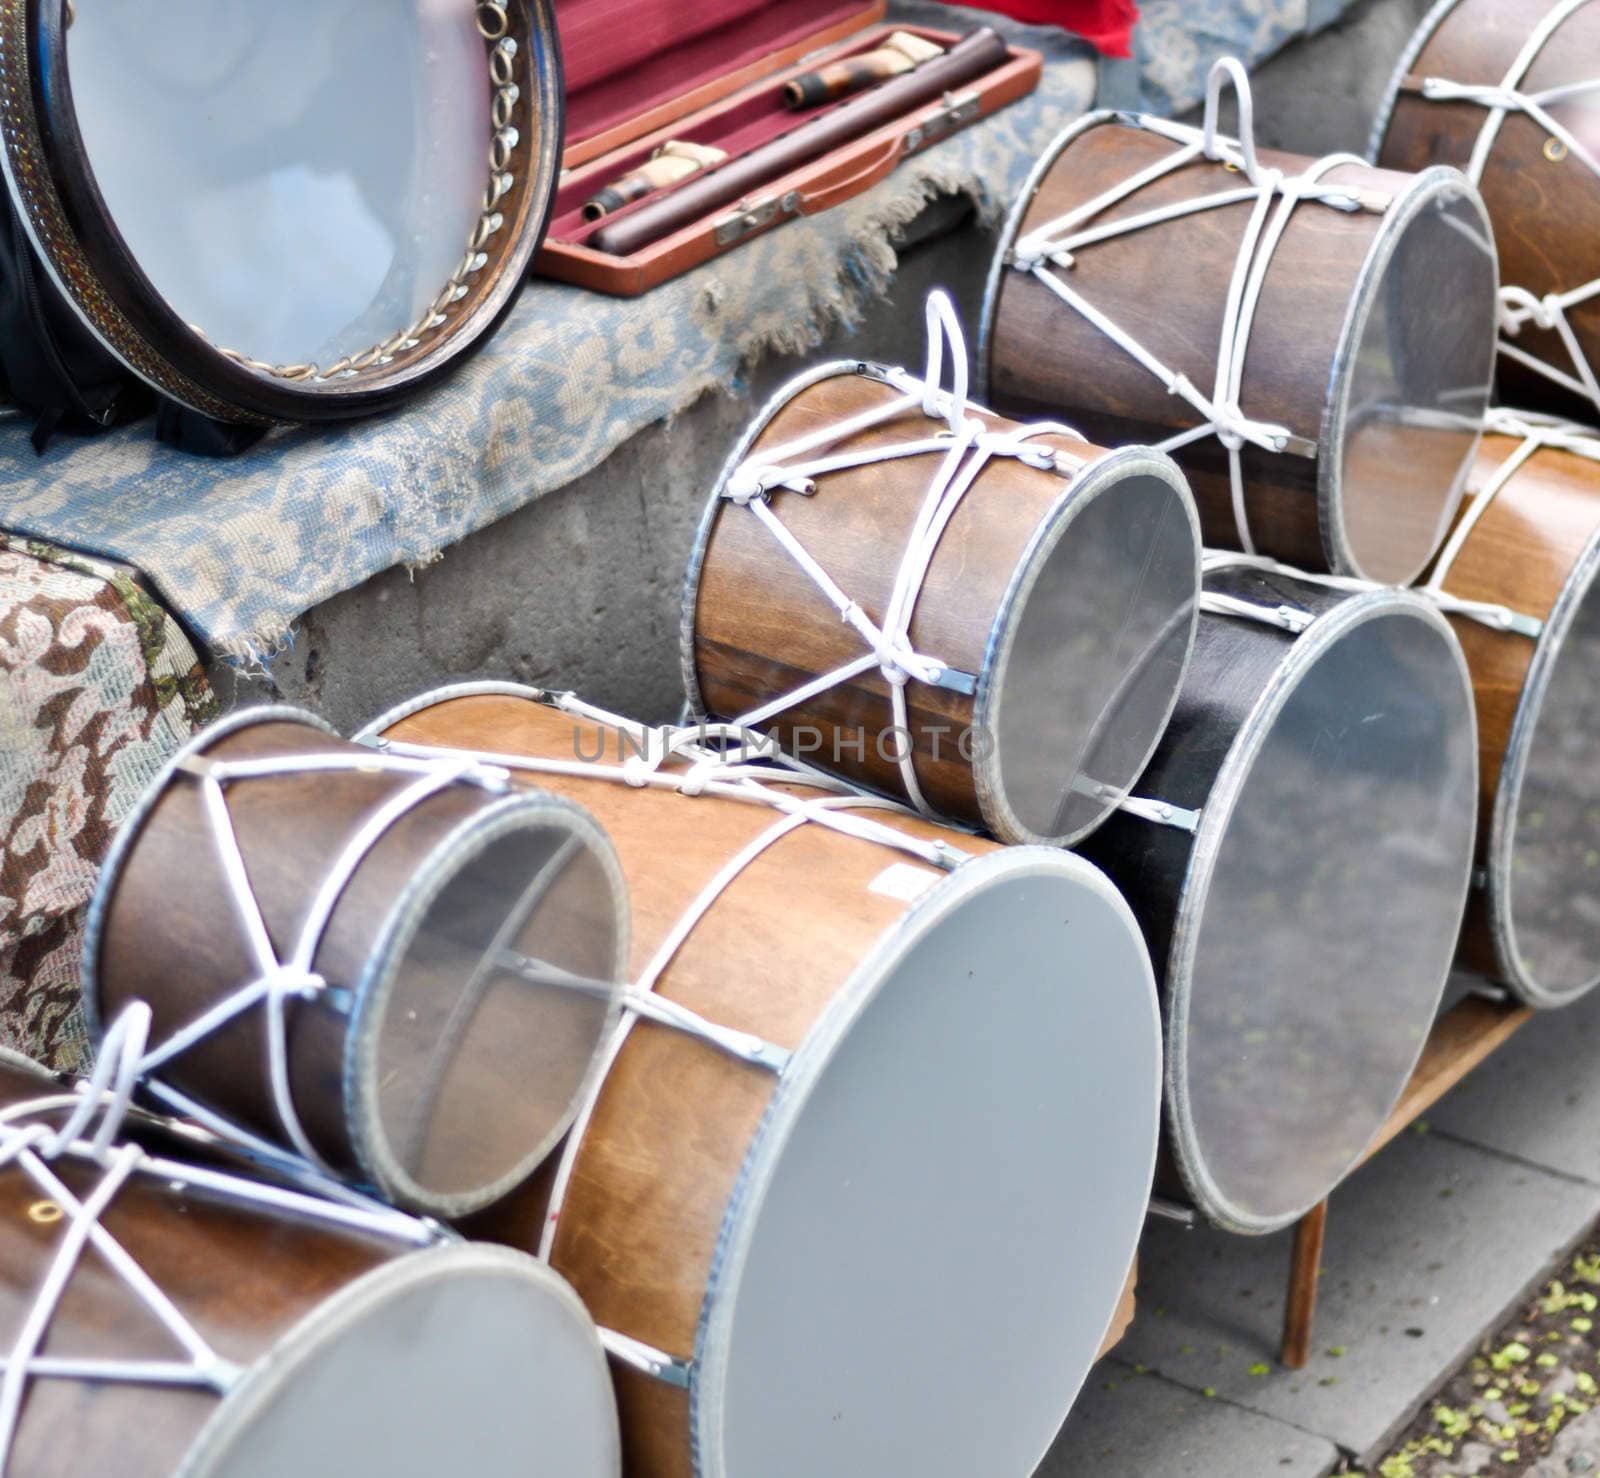 the handmade traditional national Armenian drums